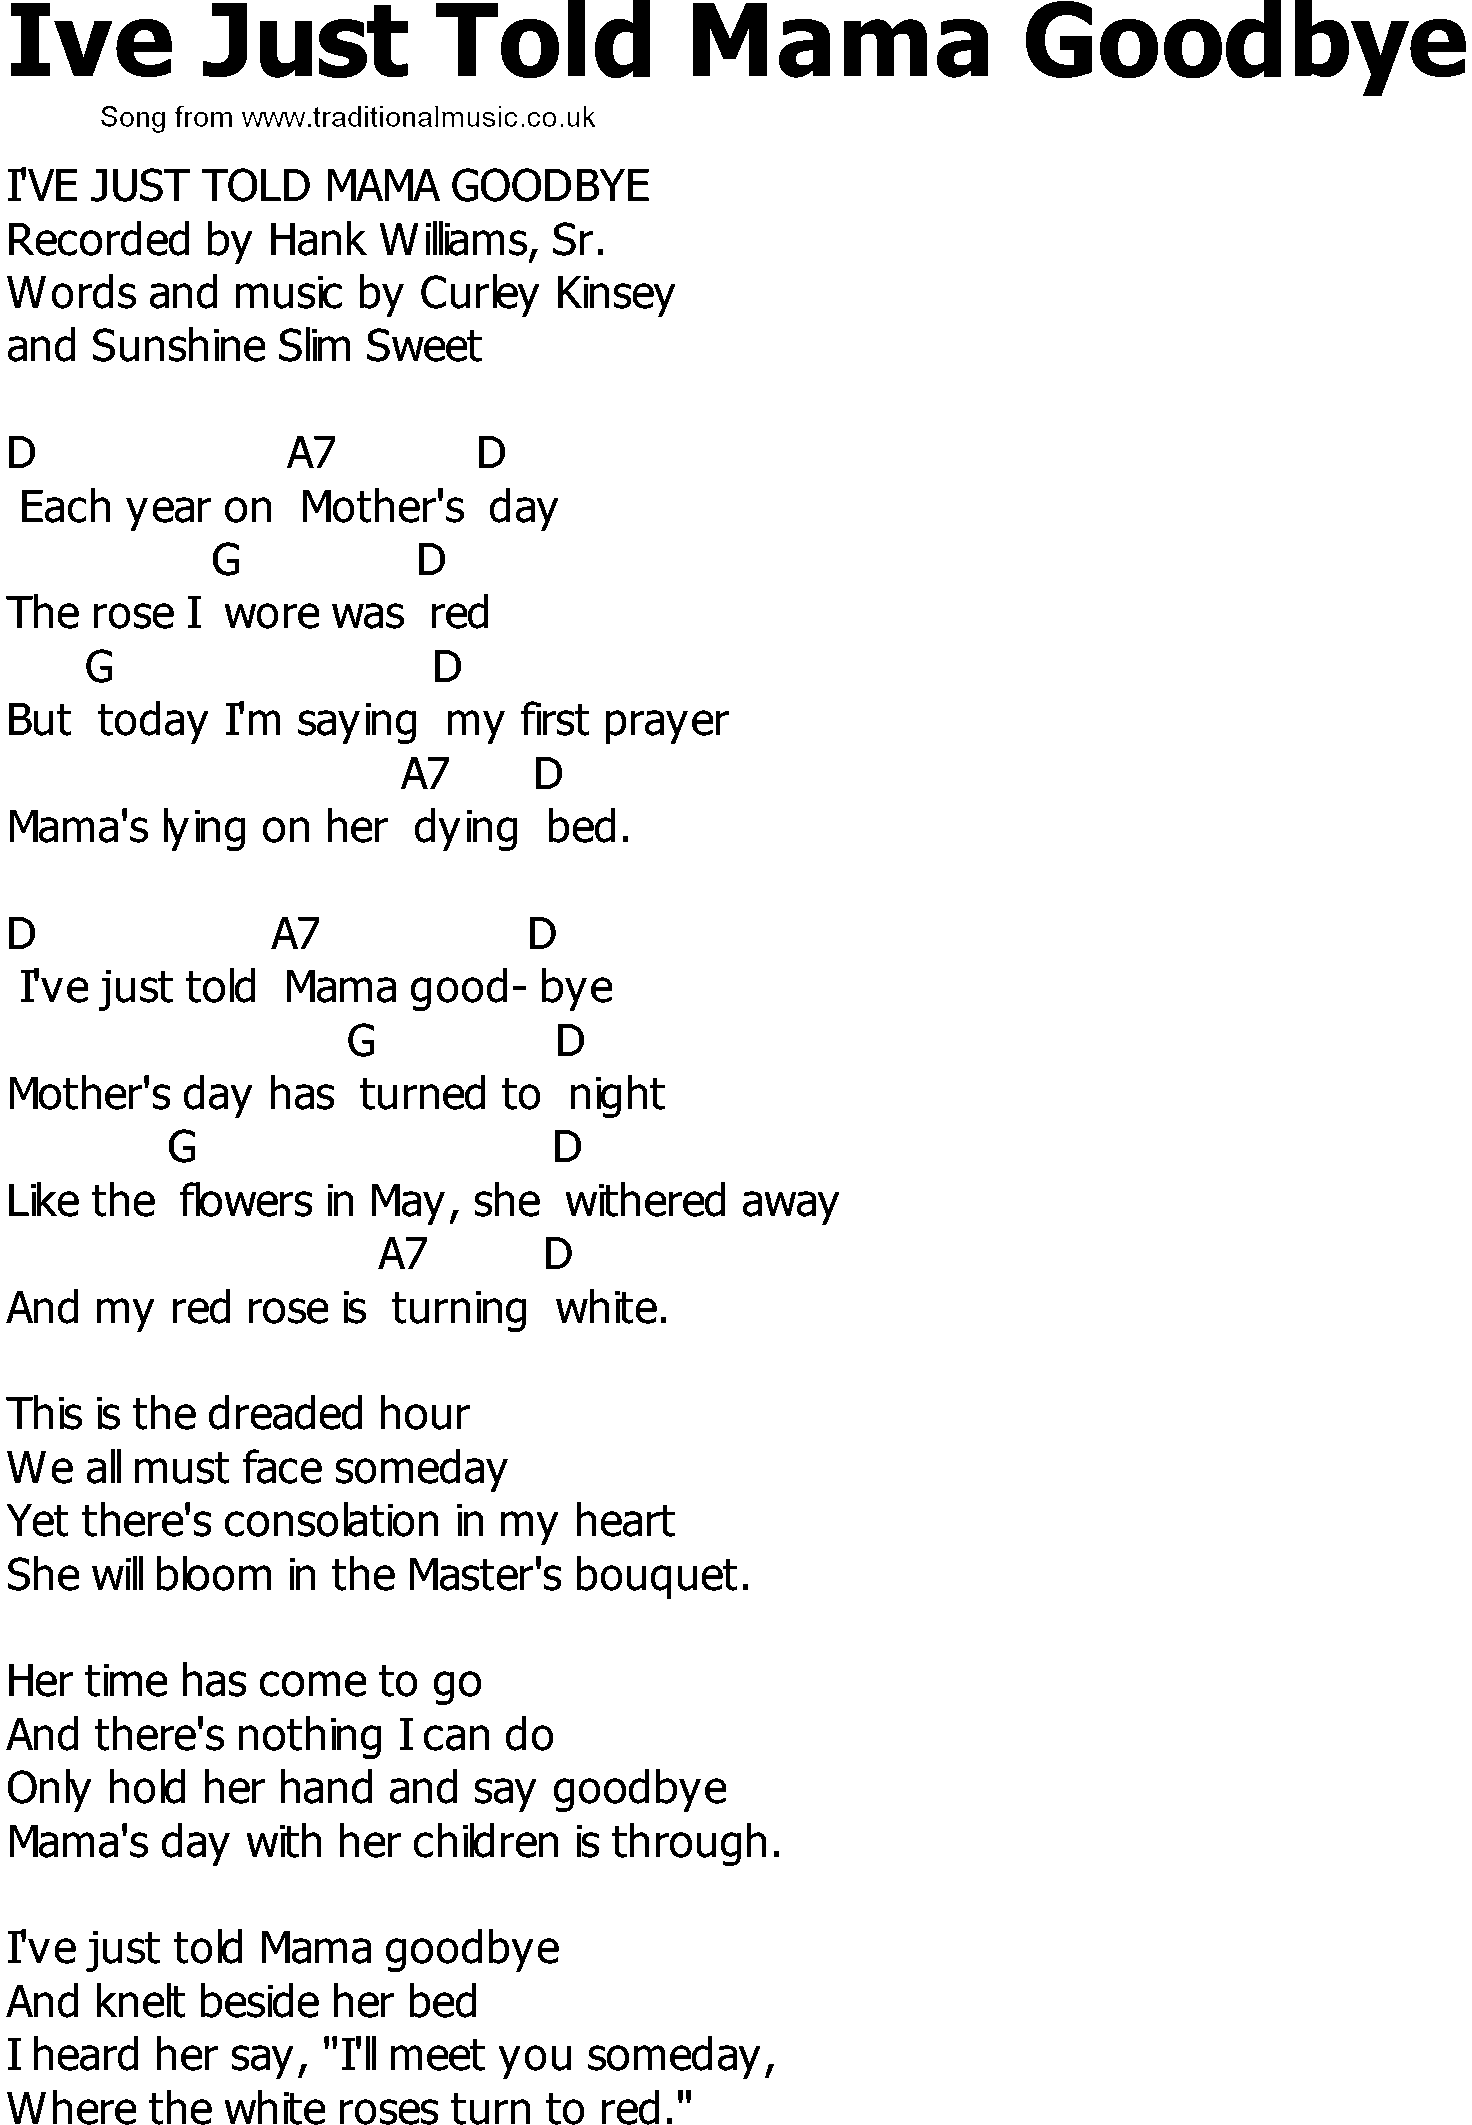 Old Country song lyrics with chords - Ive Just Told Mama Goodbye